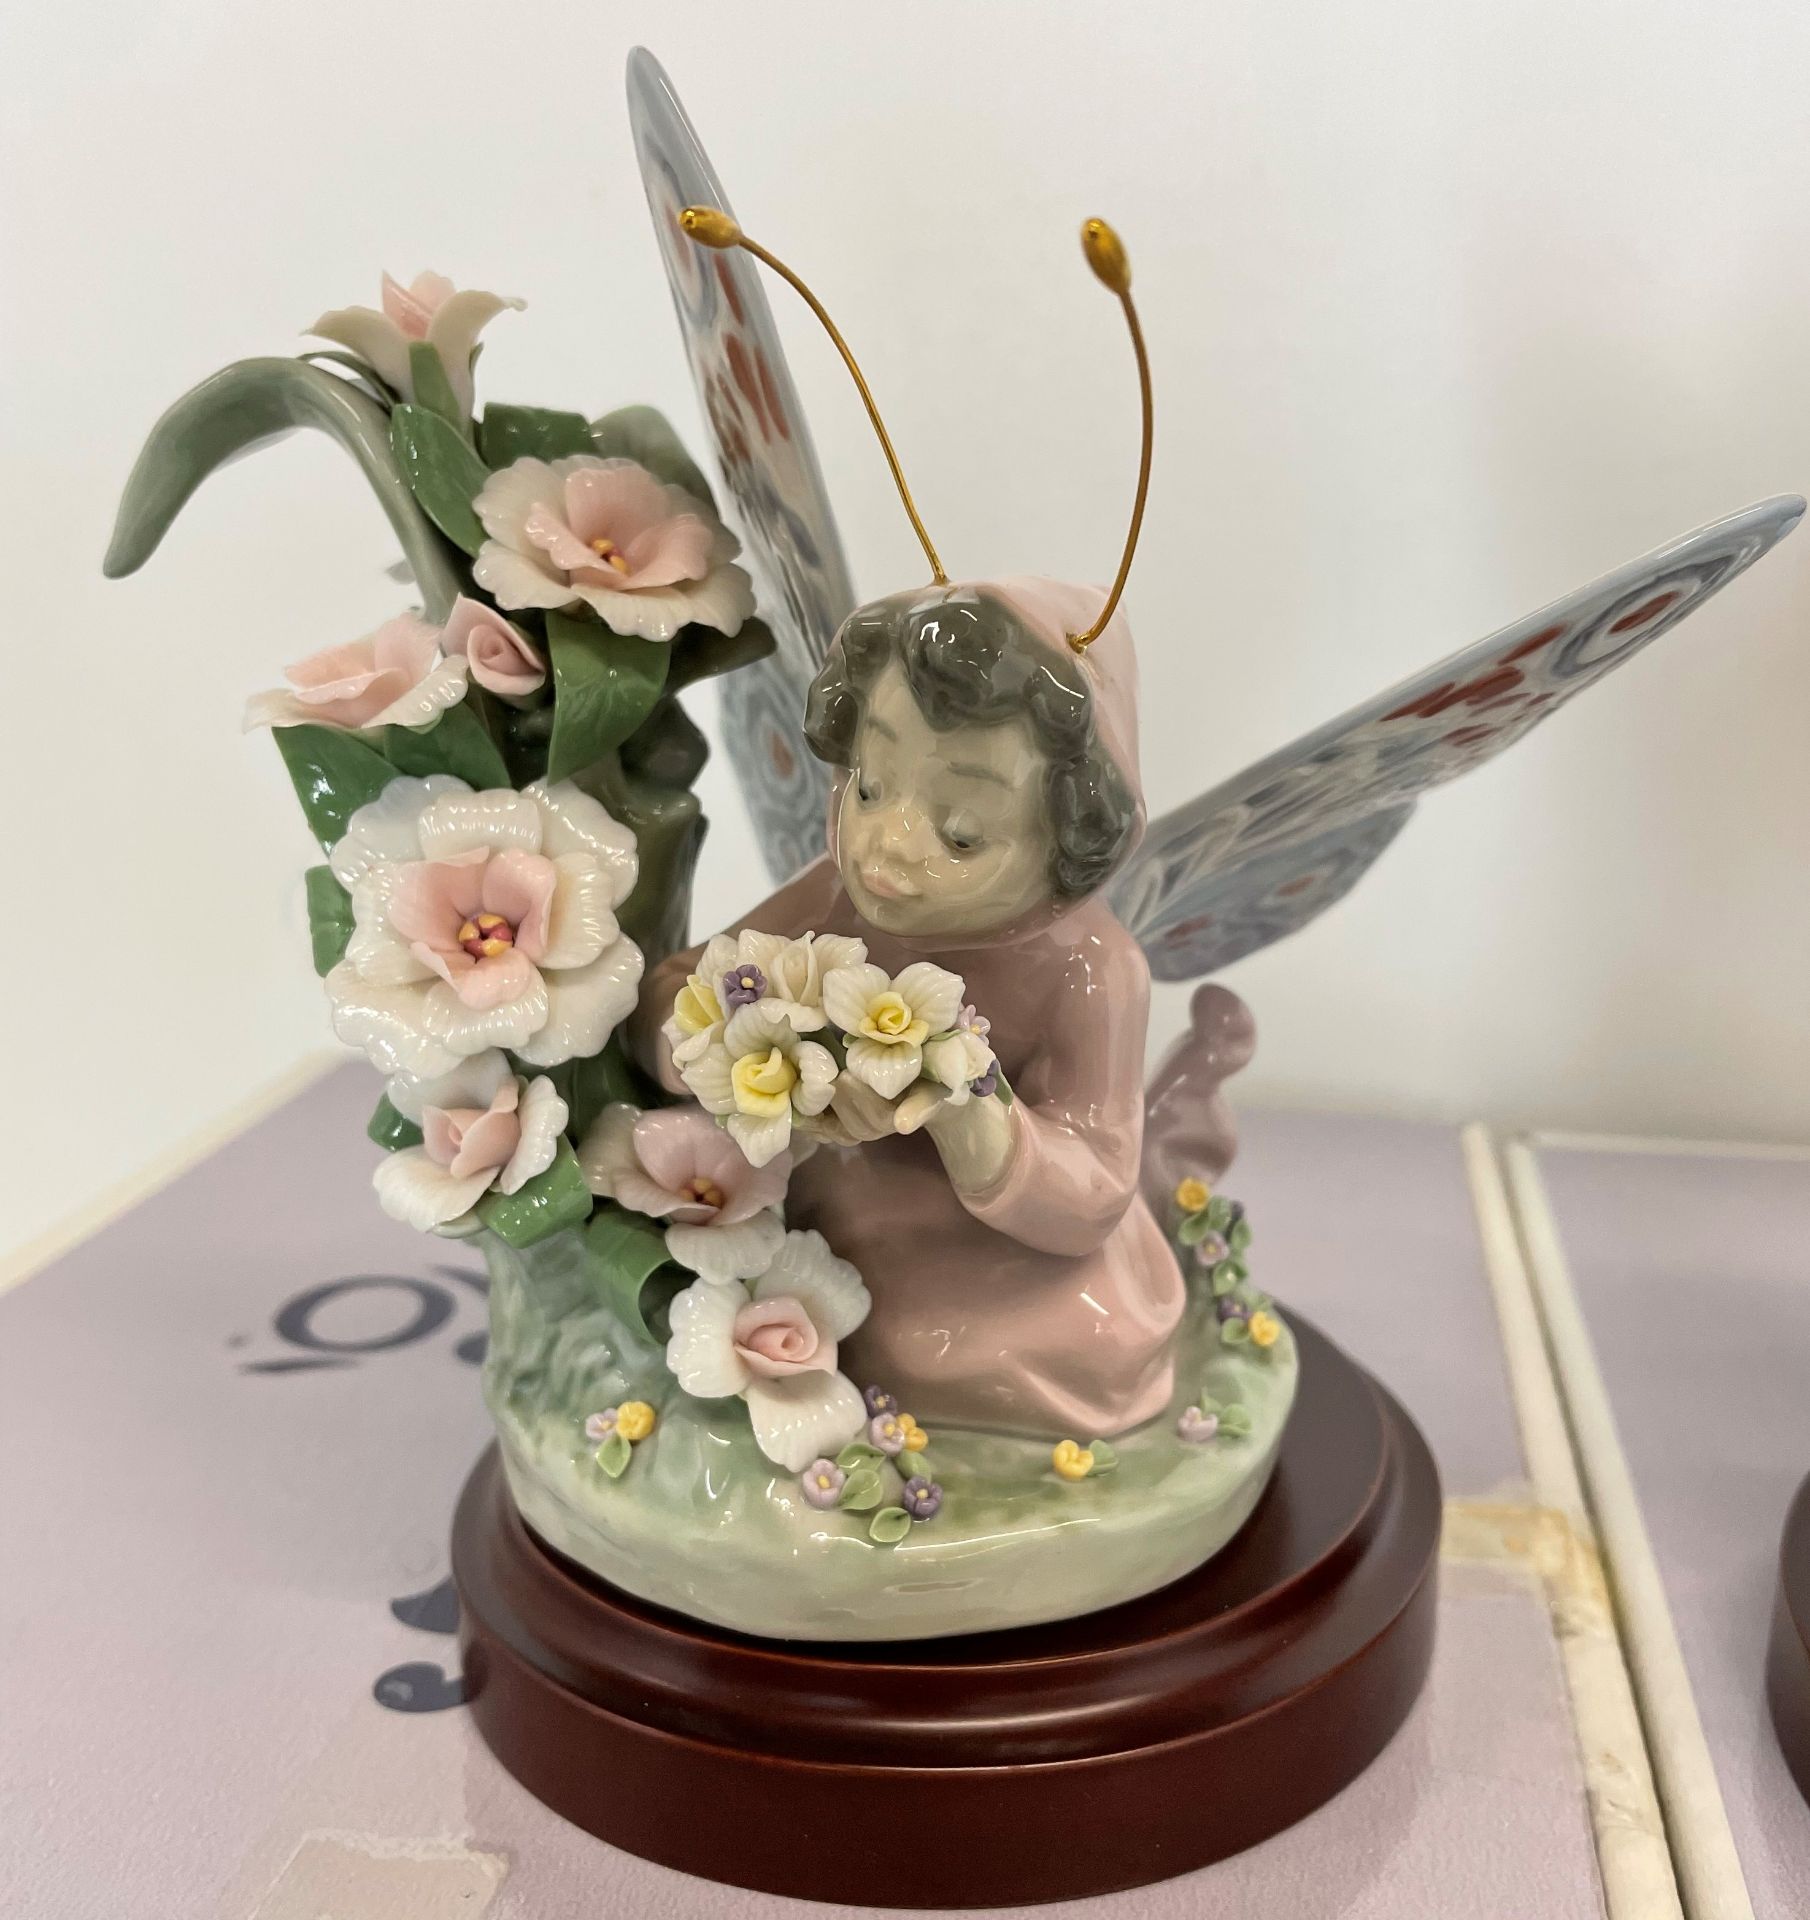 Two Lladro fairy figures with wooden bases and boxes - Floral Admiration and Floral Fantasy - Image 2 of 24